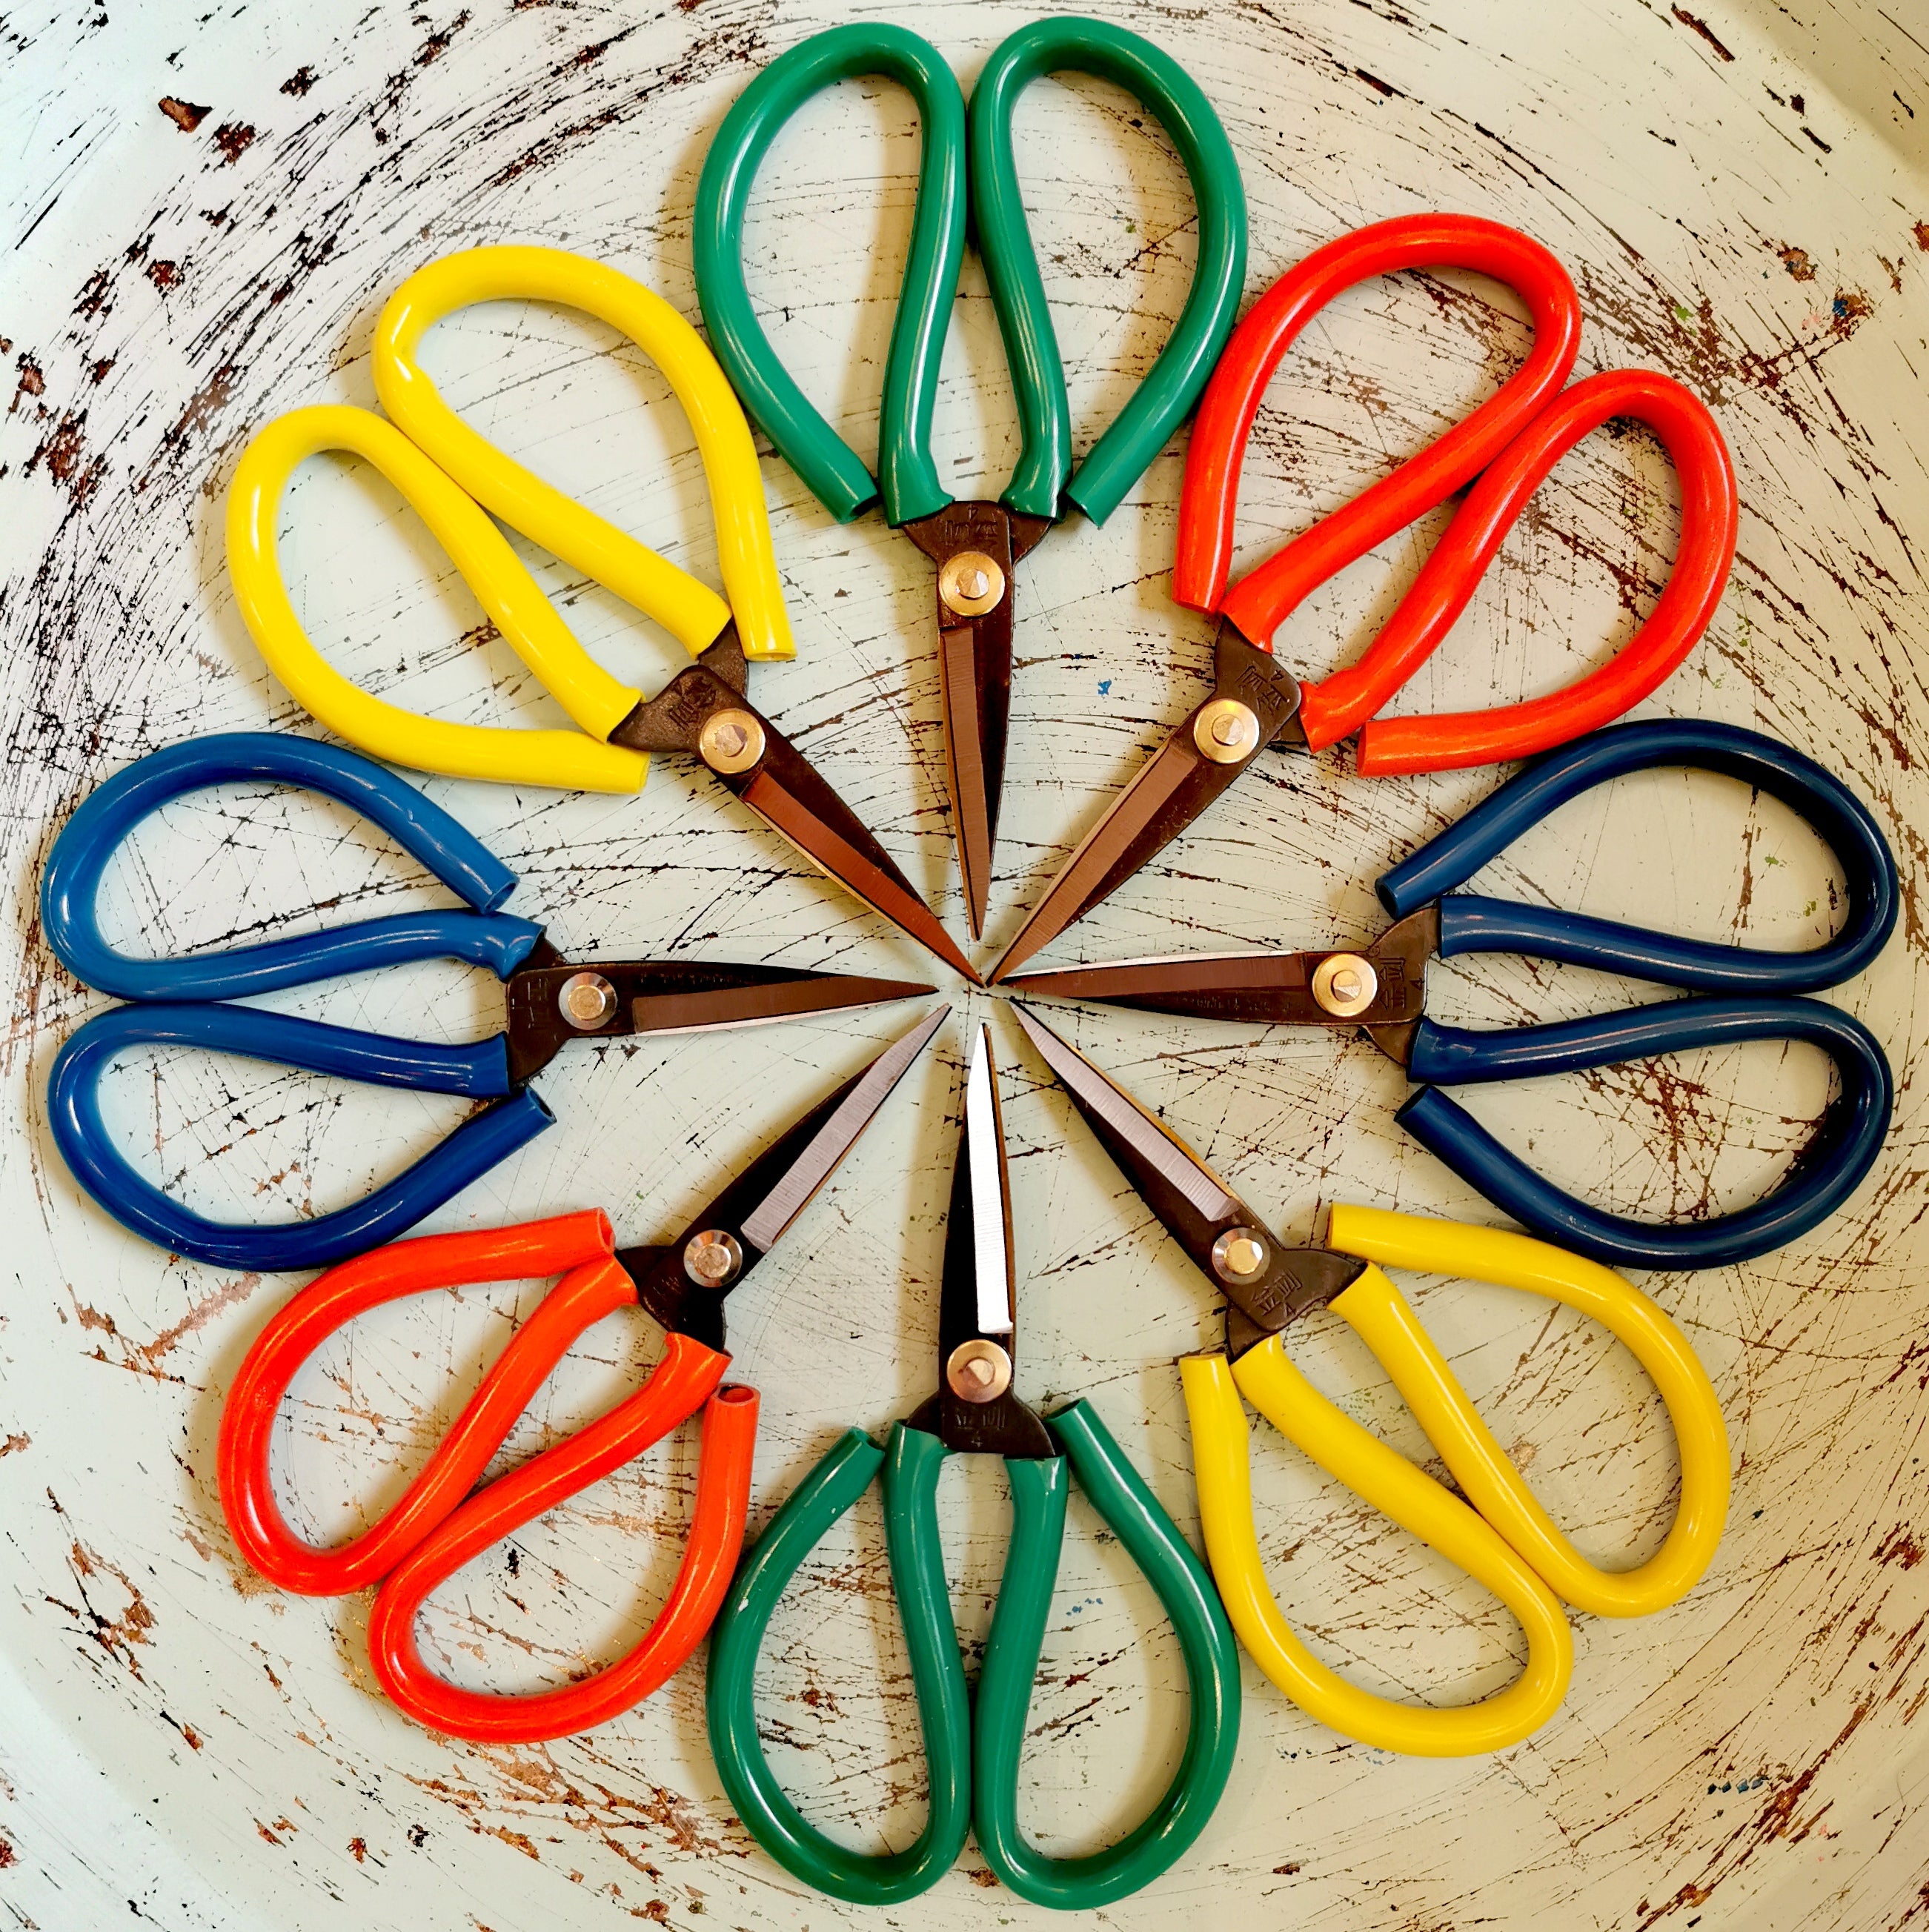 Super sharp, strong and stylish traditional Chinese scissors for kitchen, garden, crafting, sewing and general usefulness!

Steel with  plastic covered handles

16cm x 10cm 

